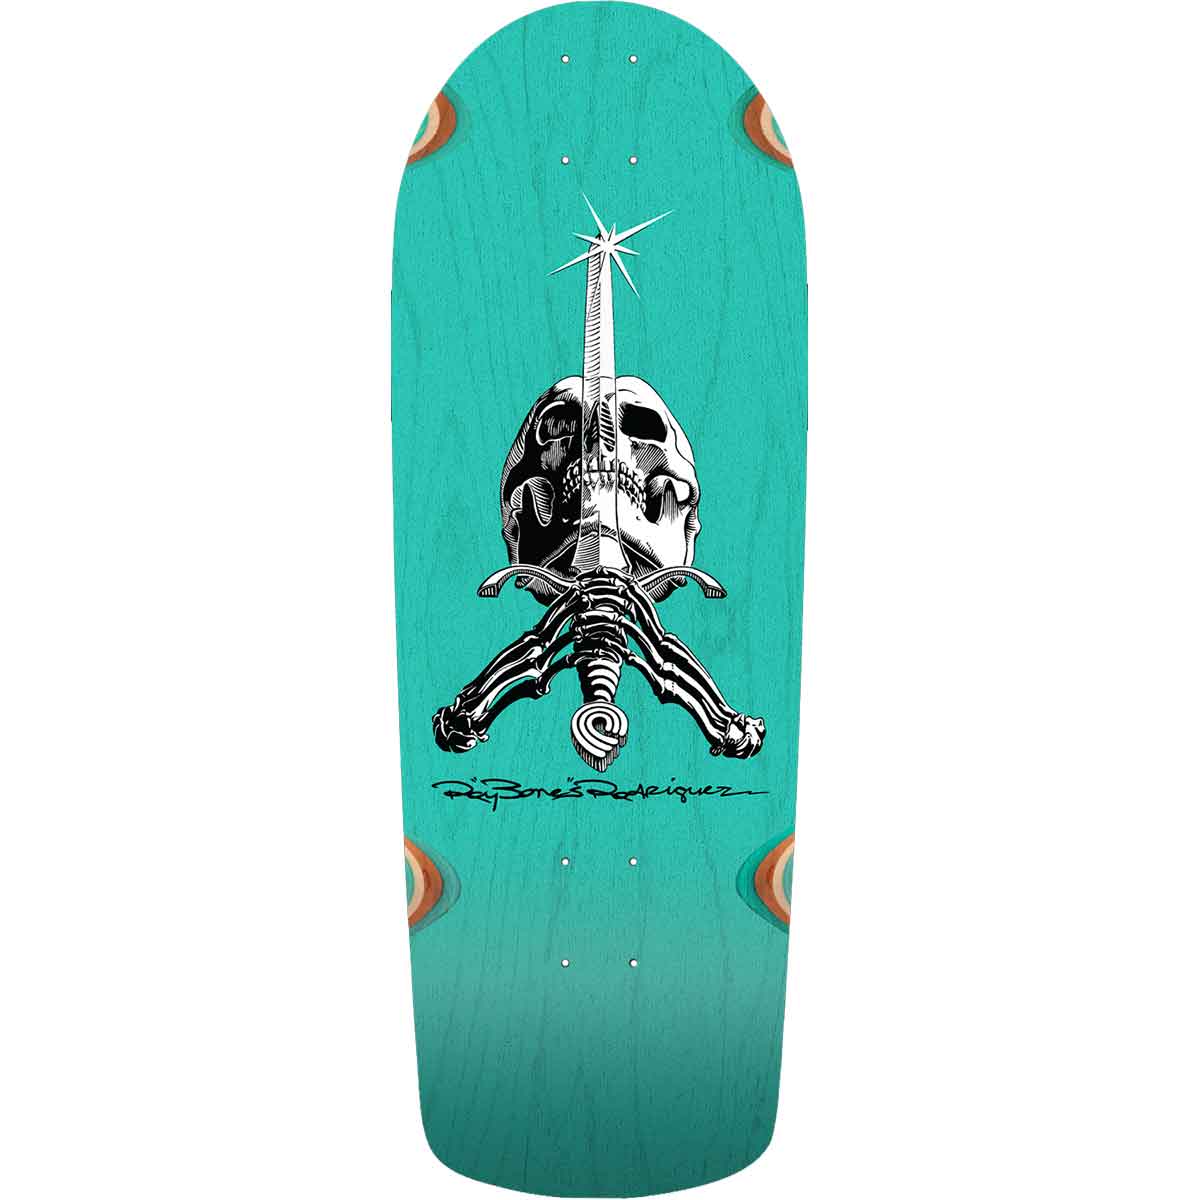 About Powell Peralta Skateboards –